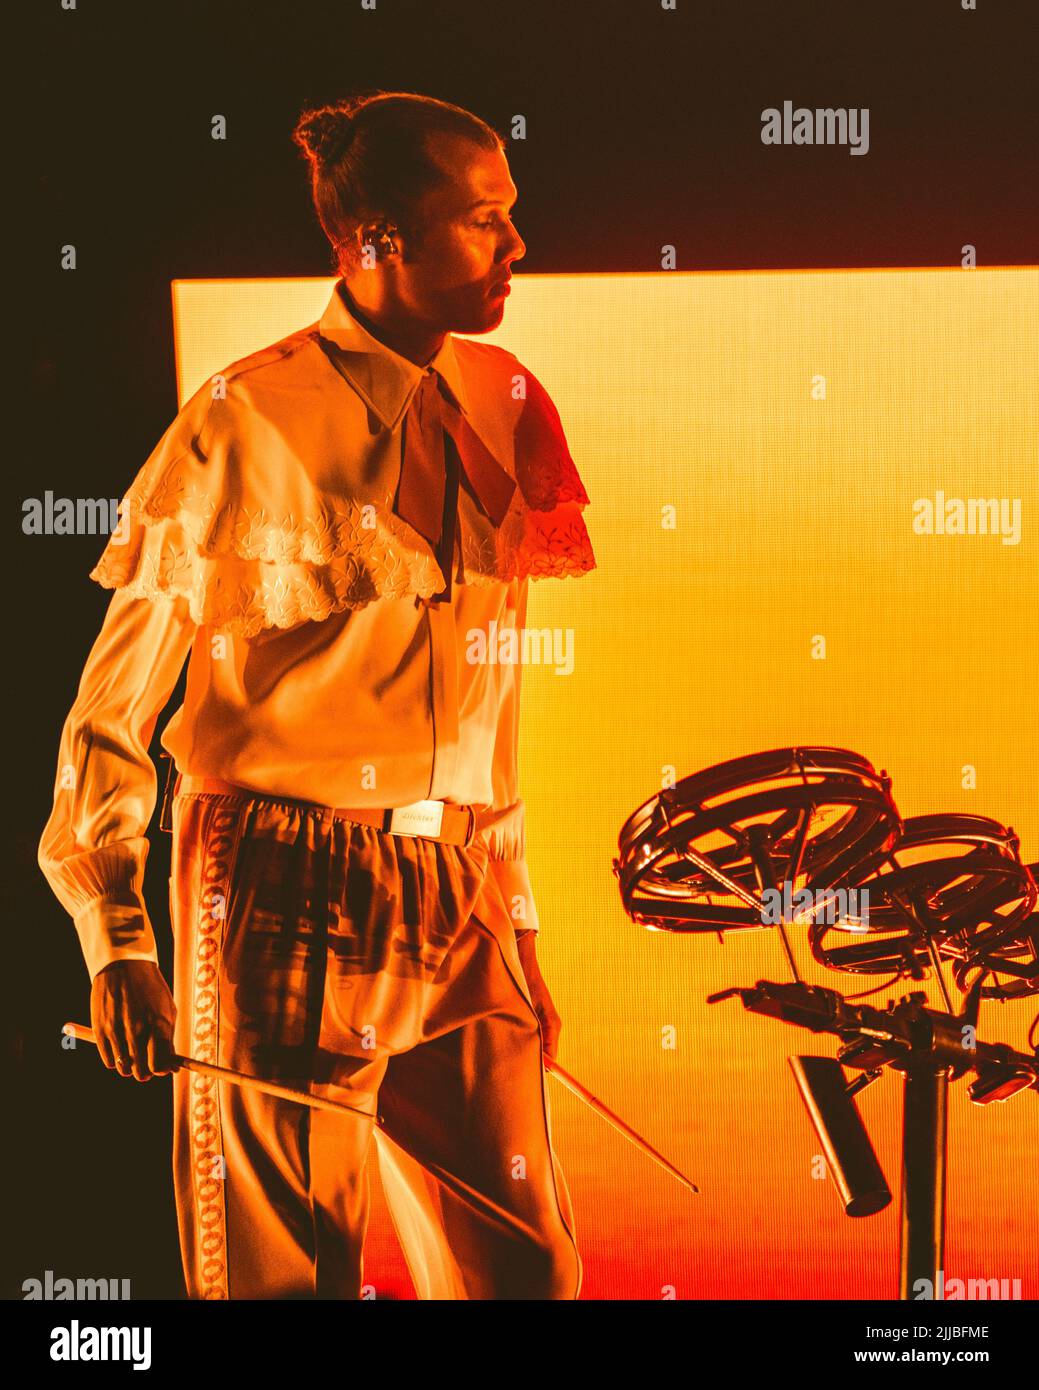 20/07/2022 - Belgian rapper and producer STROMAE performing live at Milano Summer Festival / Ippodromo SNAI, Italy Stock Photo